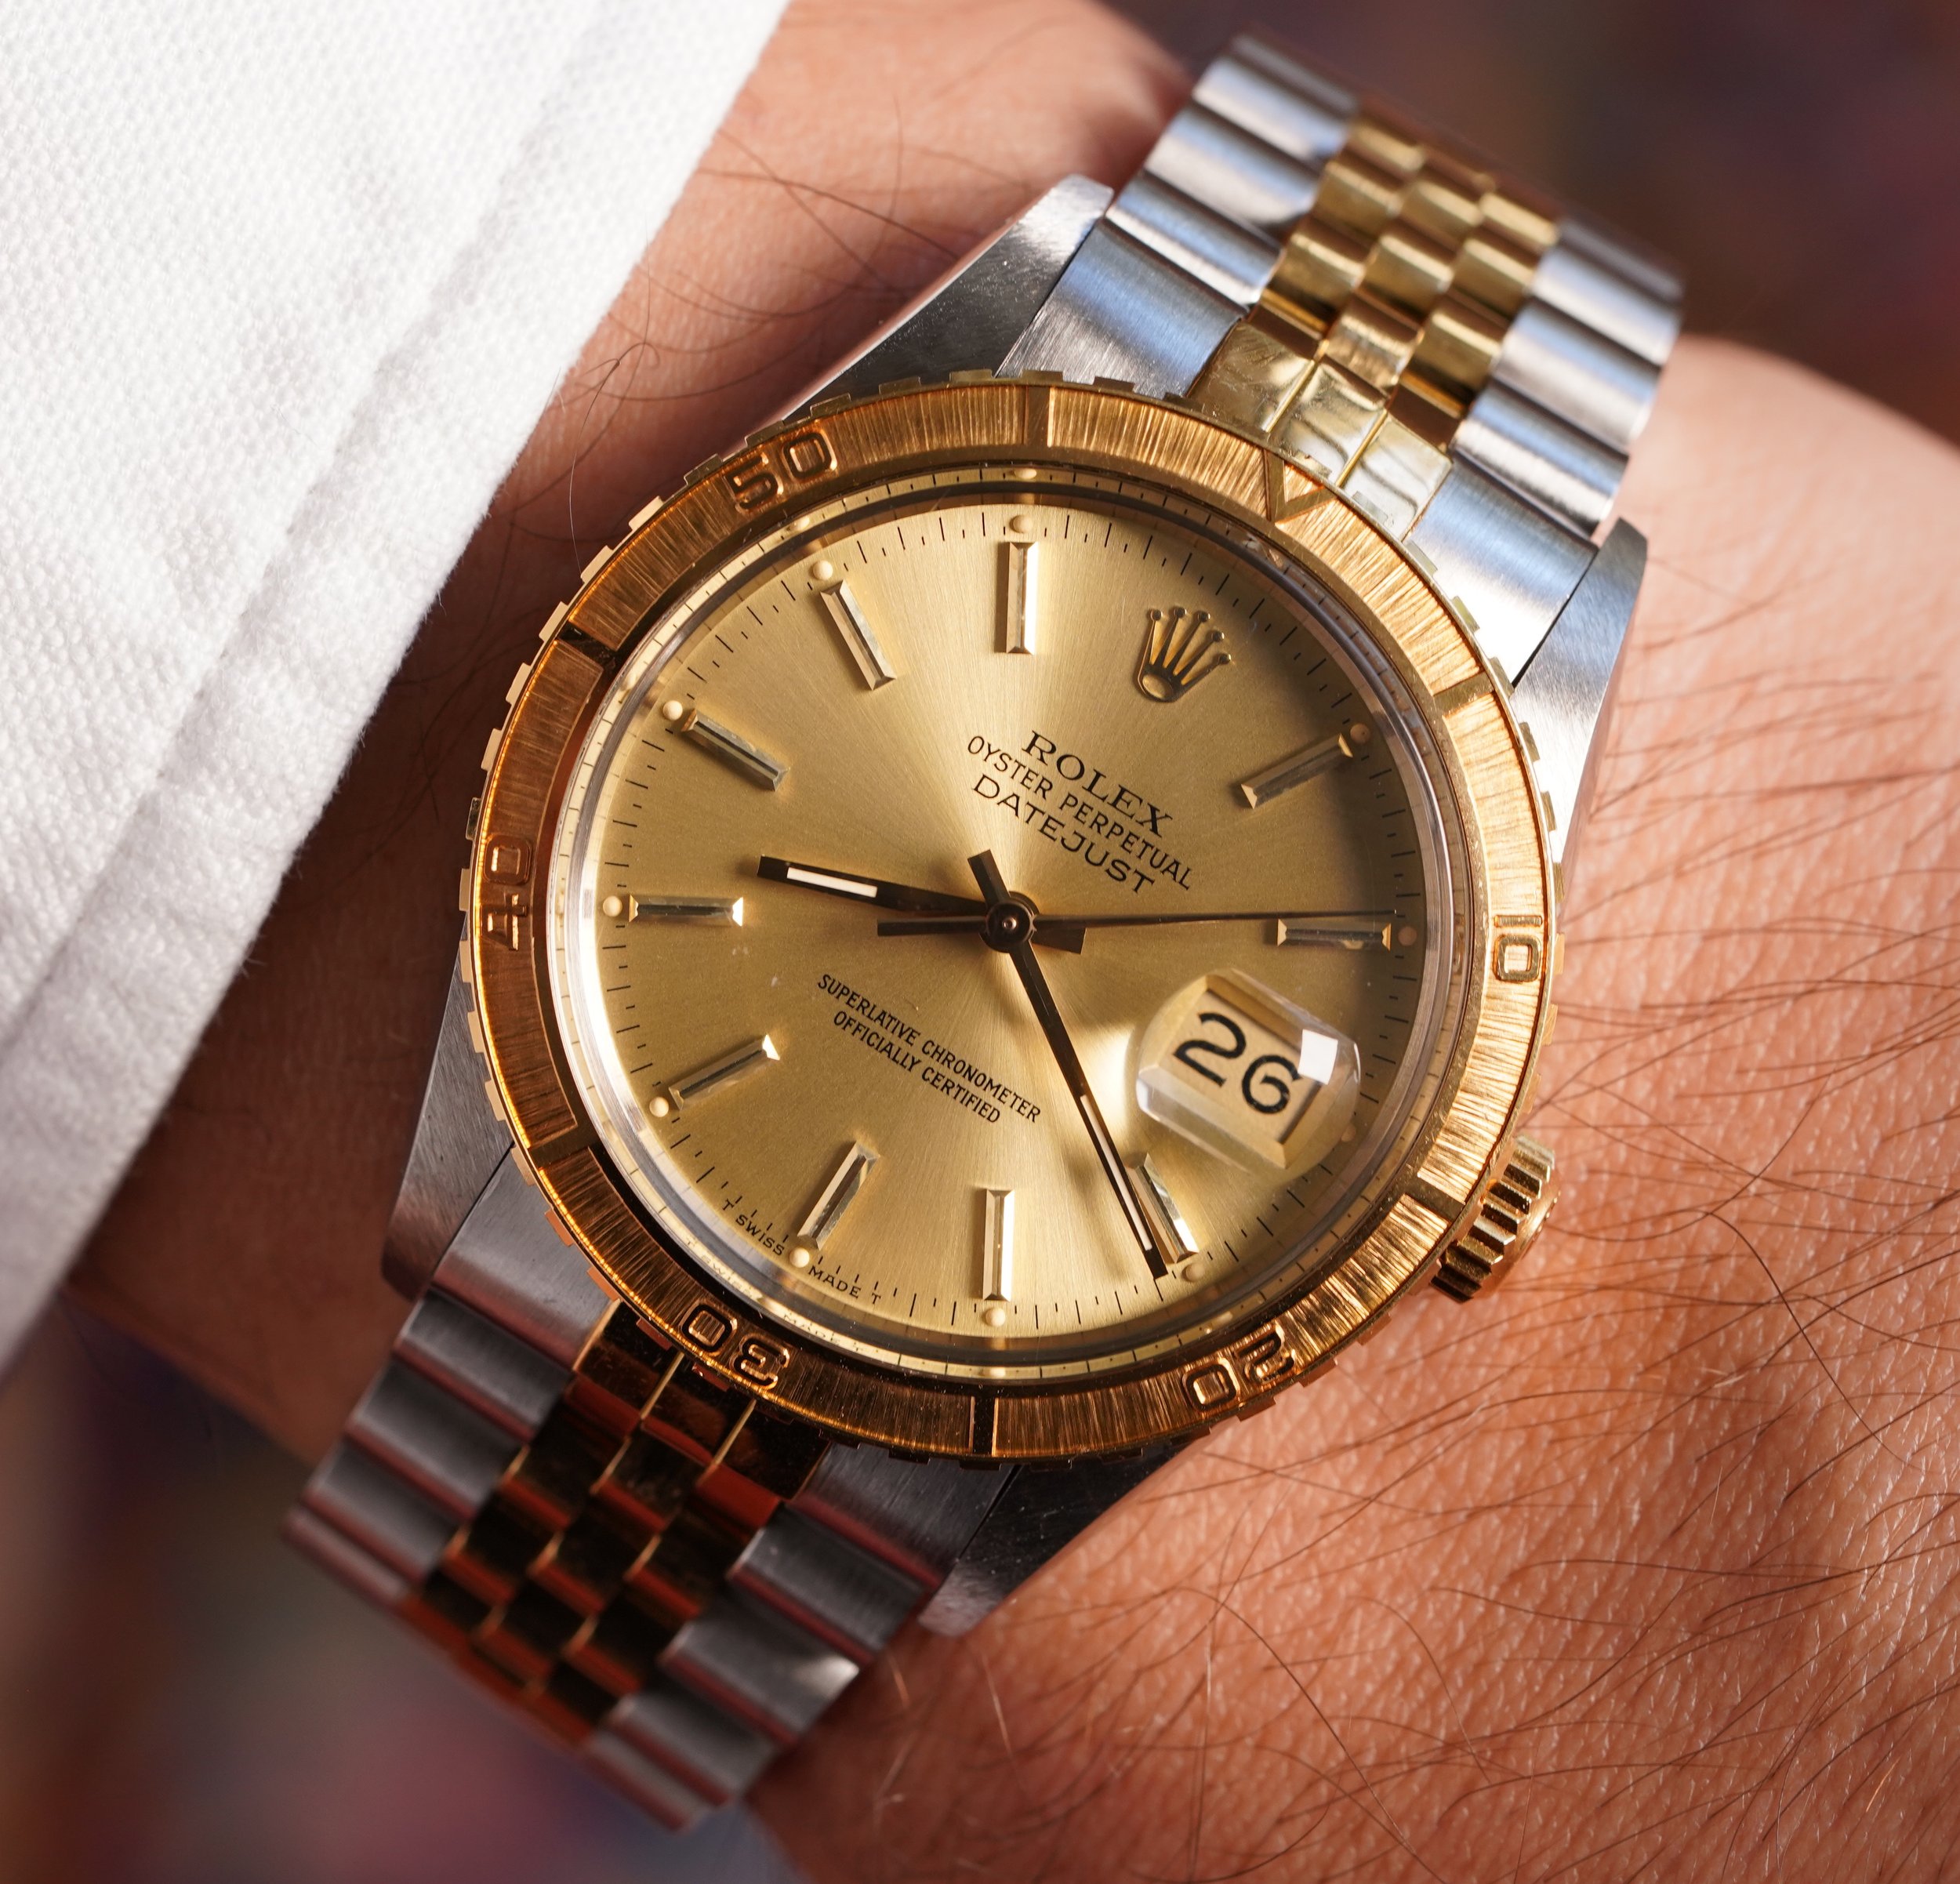 Rolex Datejust Turn-O-Graph Reference 16013 — Wind Vintage